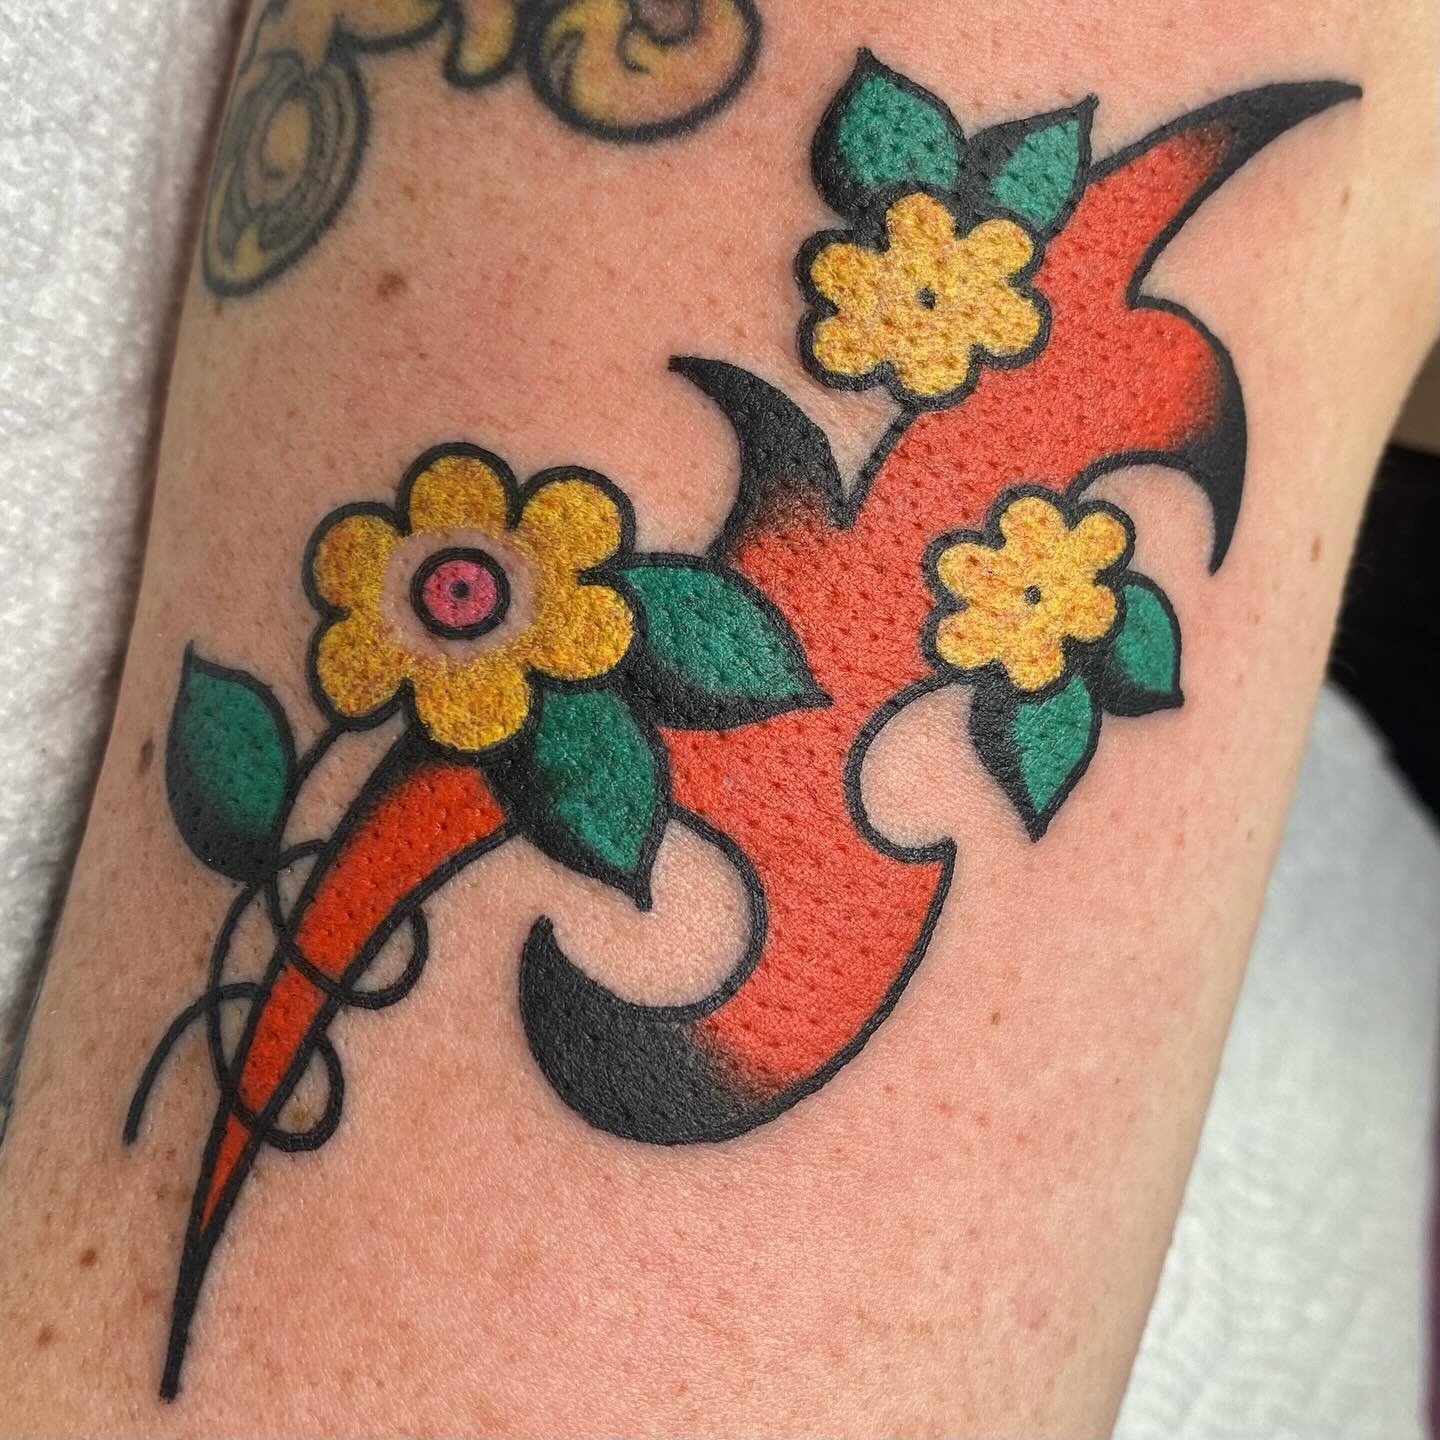 from my flash. ✨
❤️ books open / walk ins thurs-mon
📍@downtowntattoolasvegas
🔗 check &lsquo;booking&rsquo; highlight to book in
‼️check spam for reply

UPCOMING GUEST SPOTS + EVENTS :

✨PHOENIX, AZ
May 18-19th
@spottedpanthertattoo
*fully booked - 